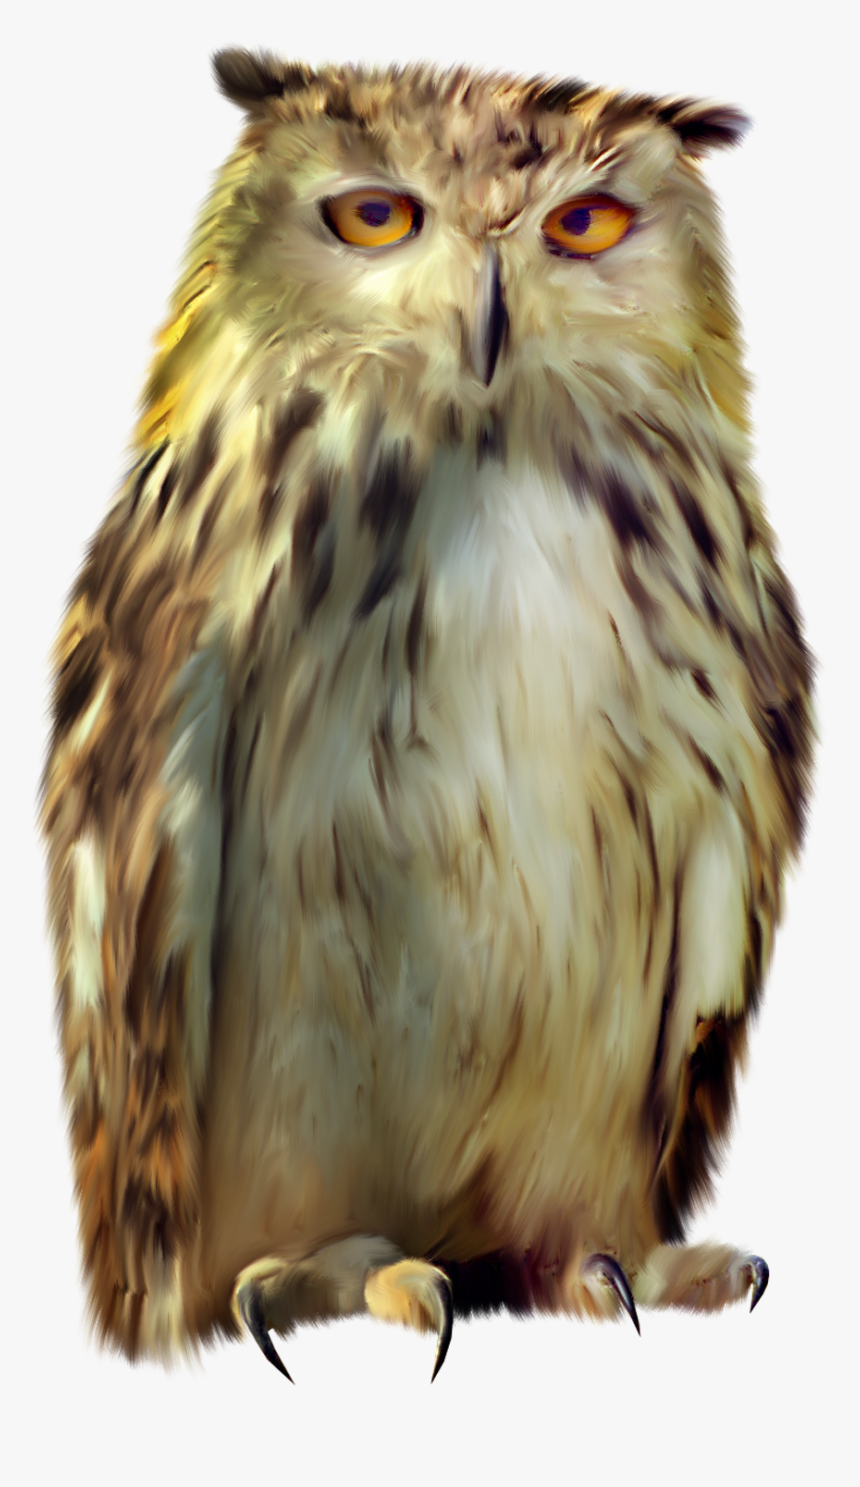 Now You Can Download Owls Png Picture - Картинка Сова На Прозрачном Фоне, Transparent Png, Free Download